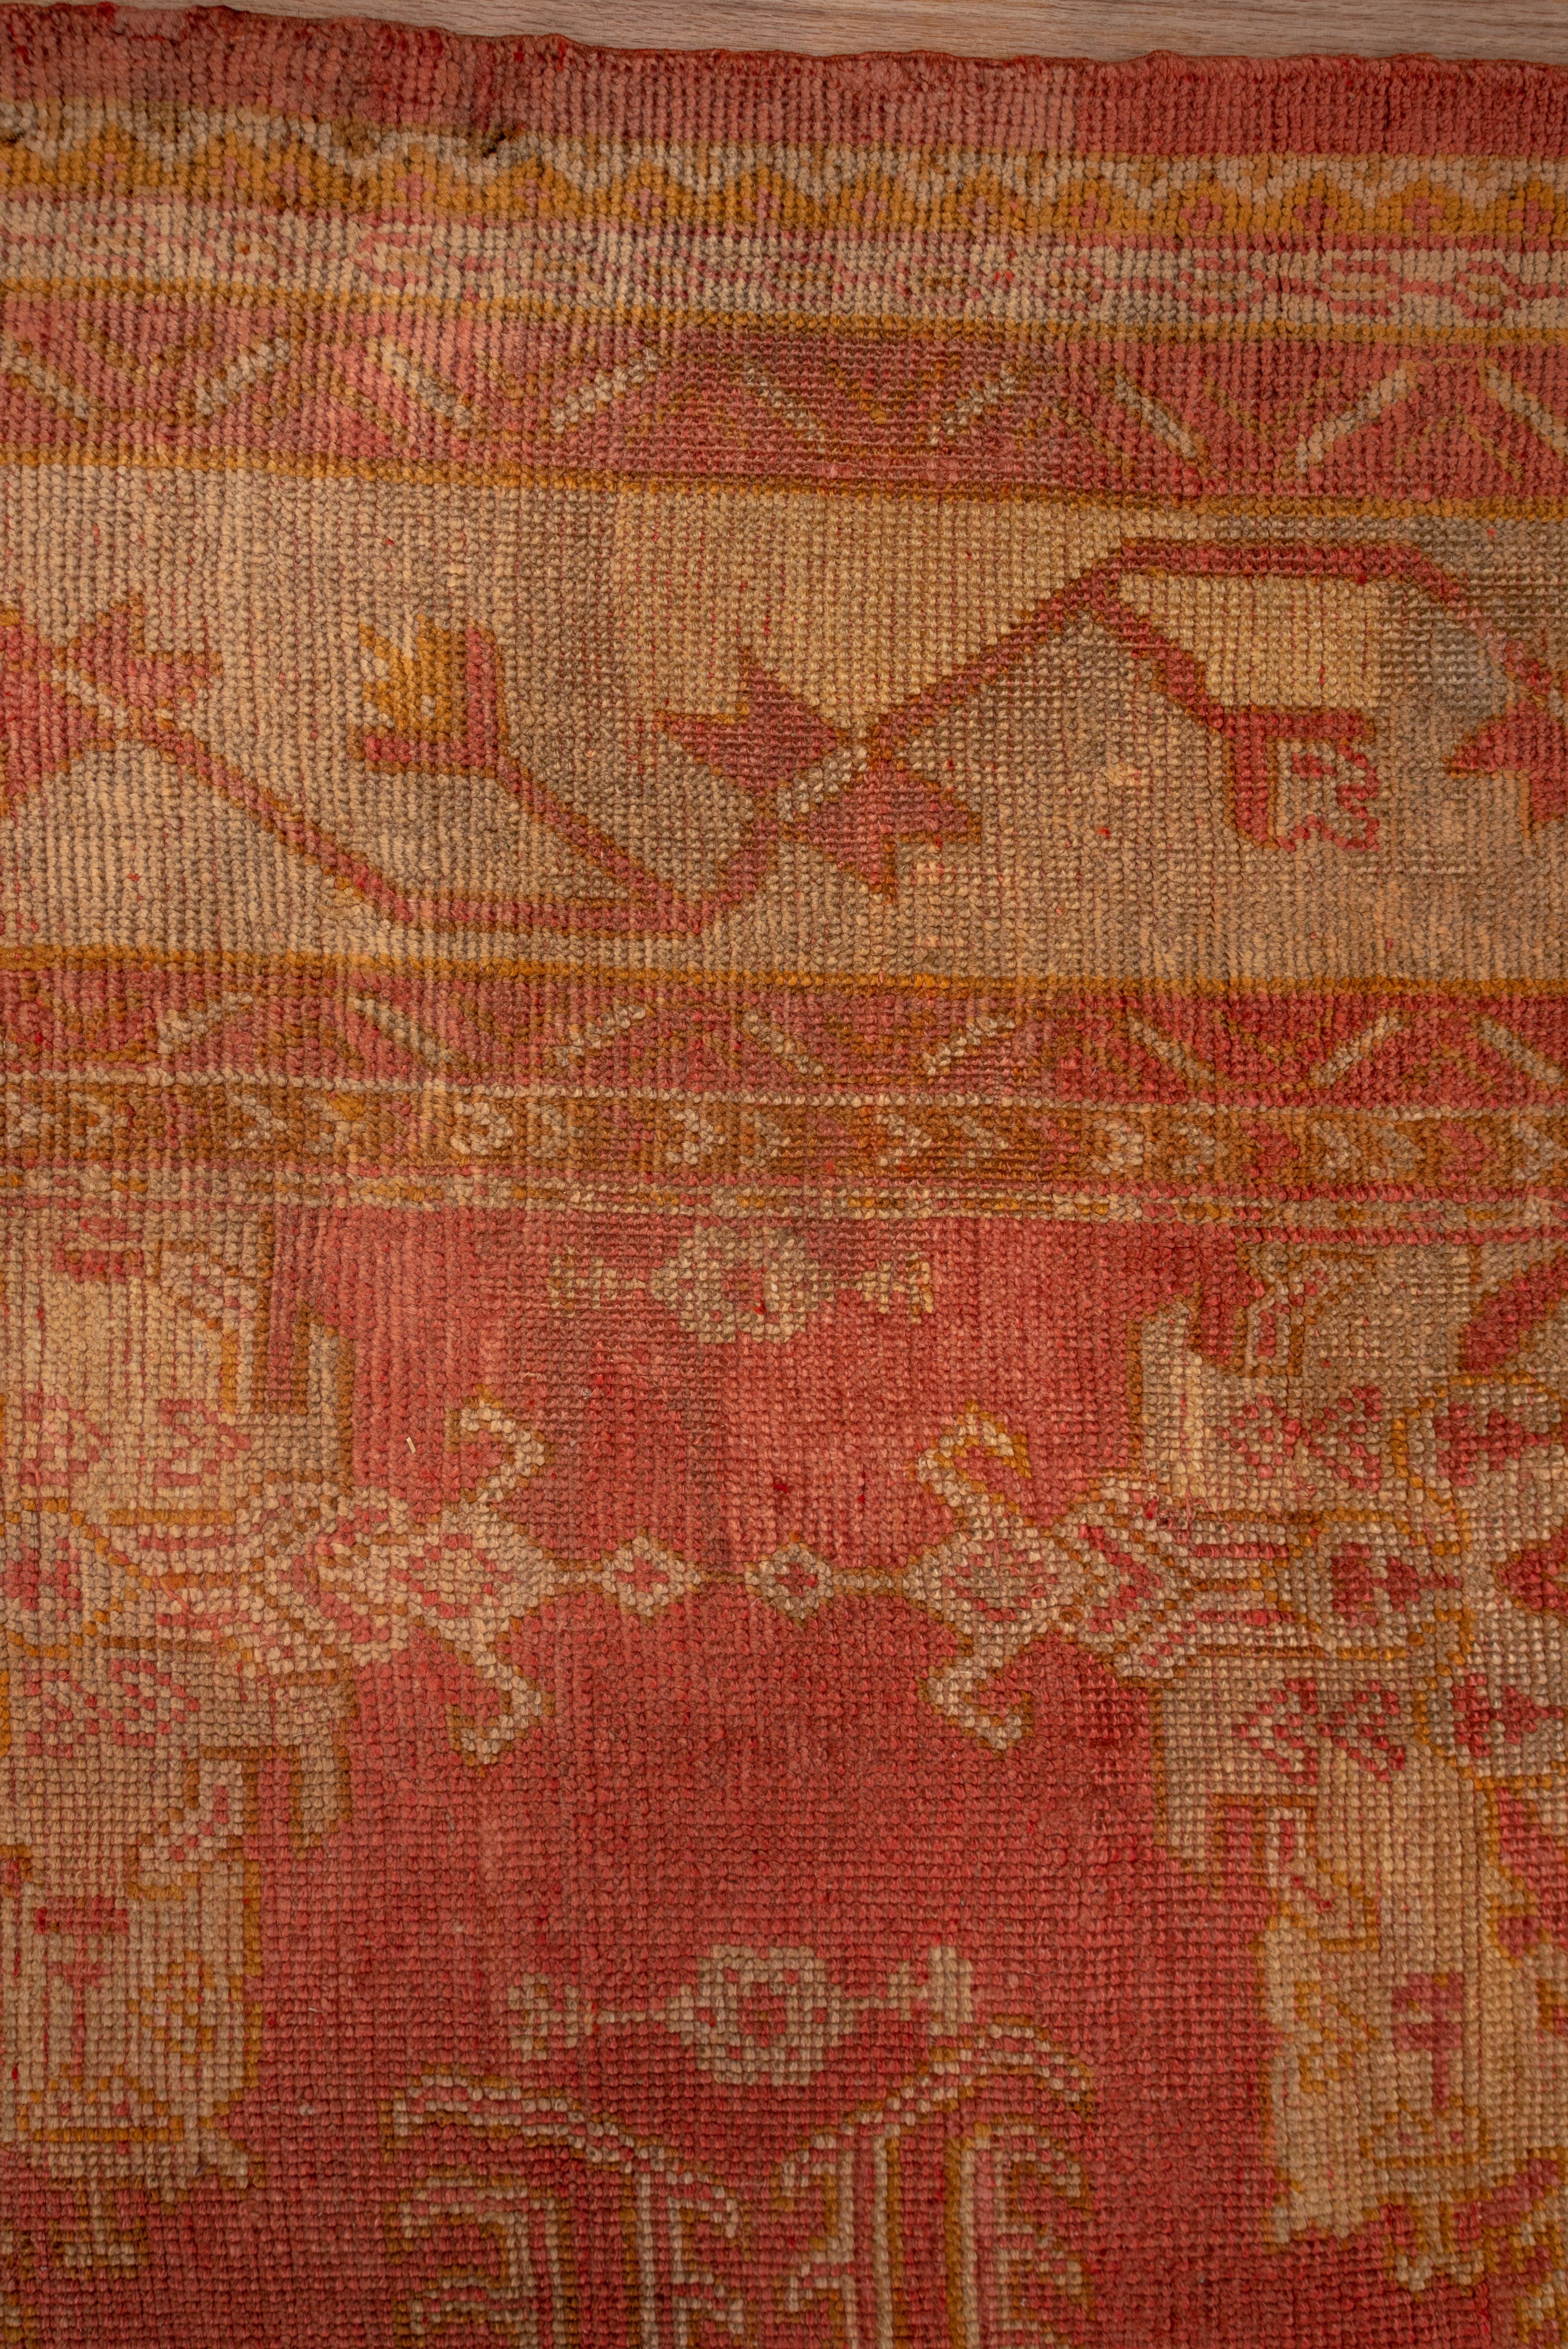 1910s Antique Turkish Oushak Area Rug, Light Red All-Over Field, Gold Borders For Sale 2